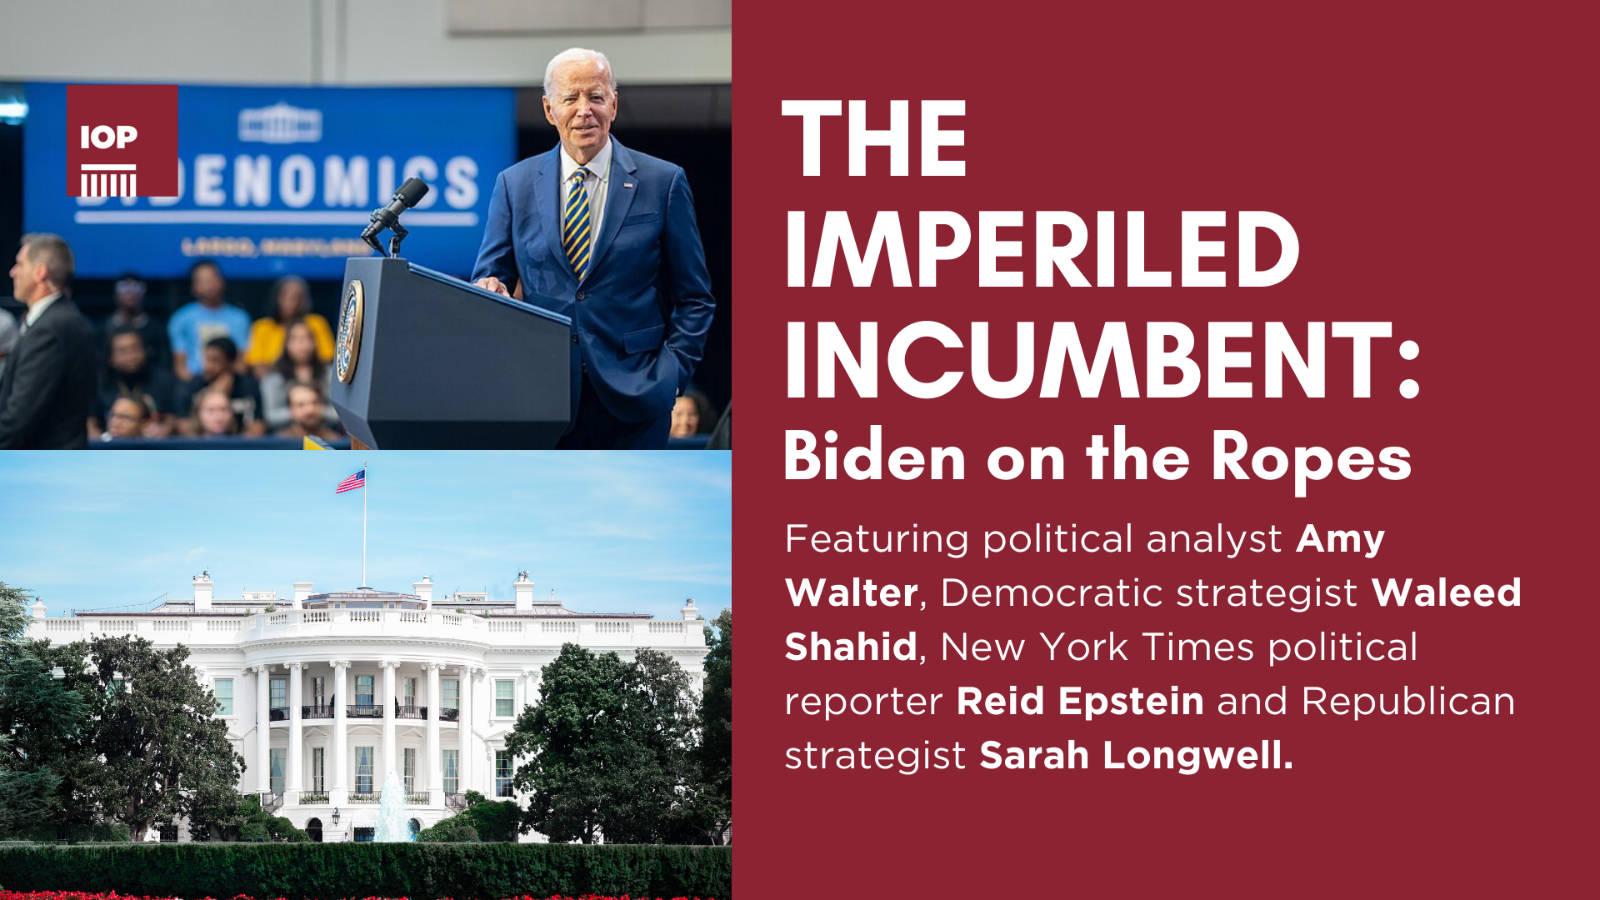 Poster Image for The Imperiled Incumbent: Biden on the Ropes